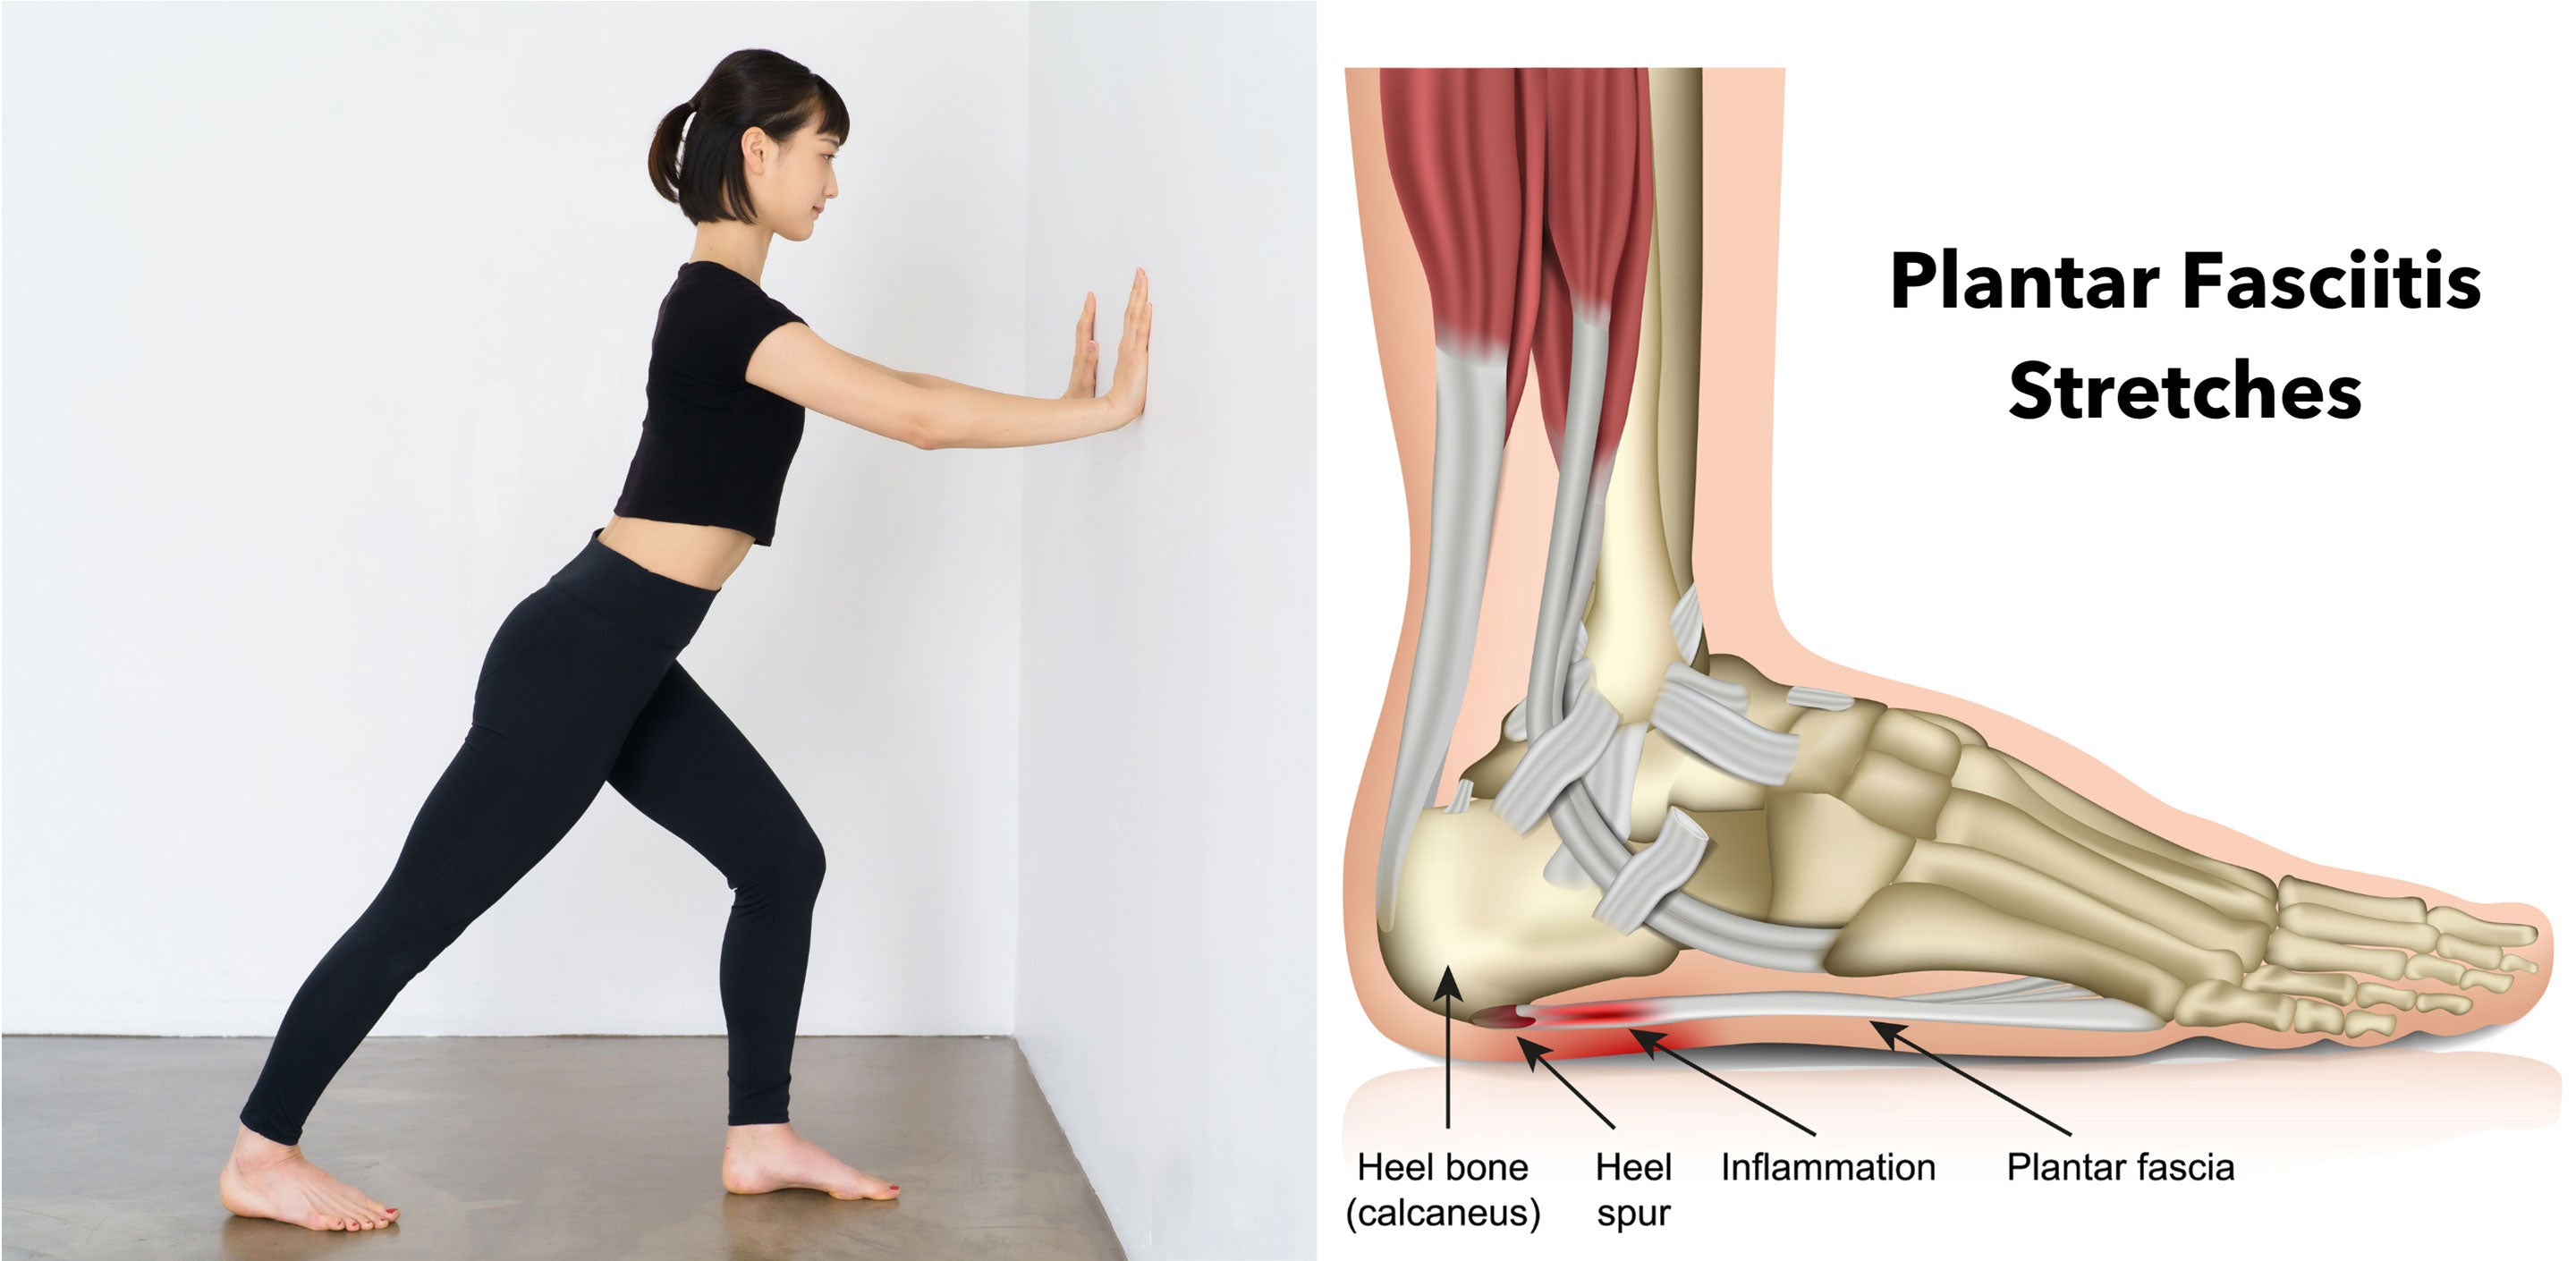 What Is Plantar Fasciitis? | Symptoms, Causes, and Stretches Explained ...